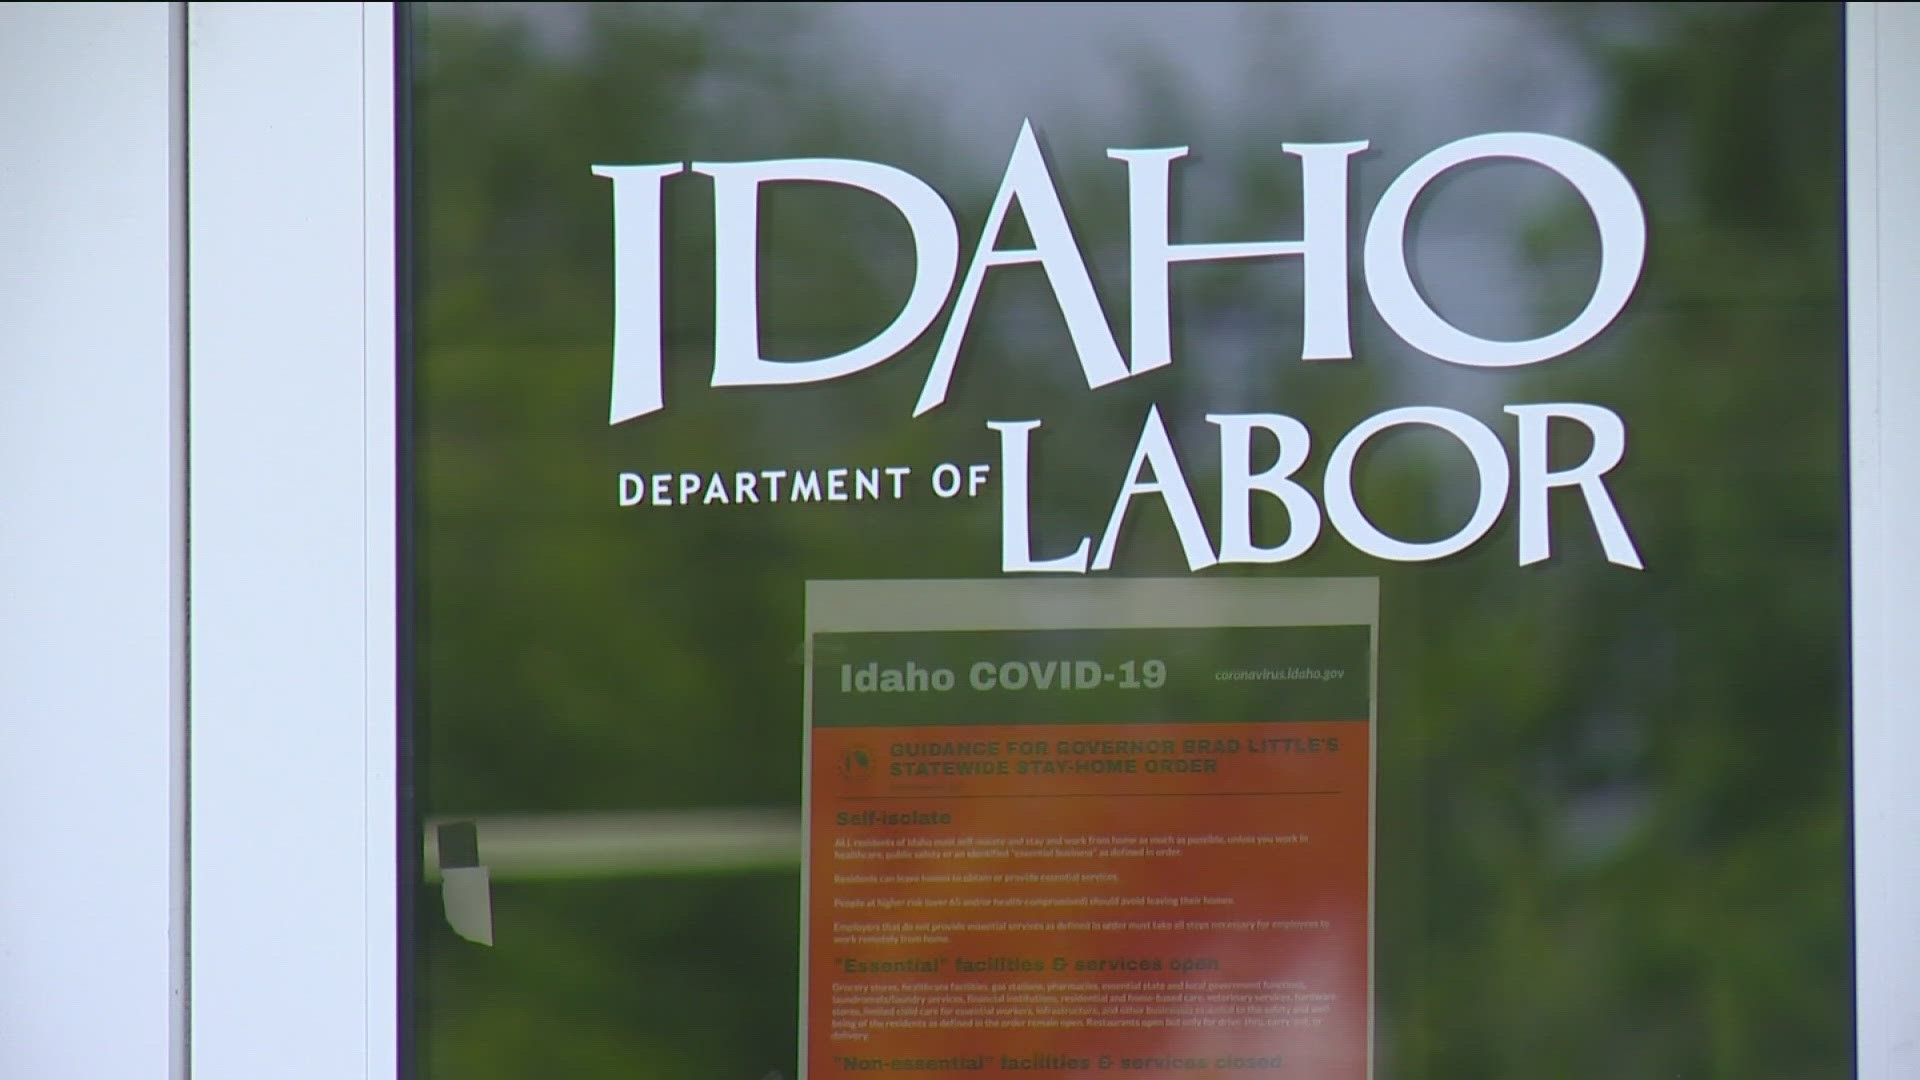 Today on Growing Idaho, the thing that's growing along with our population is Idaho's unemployment.